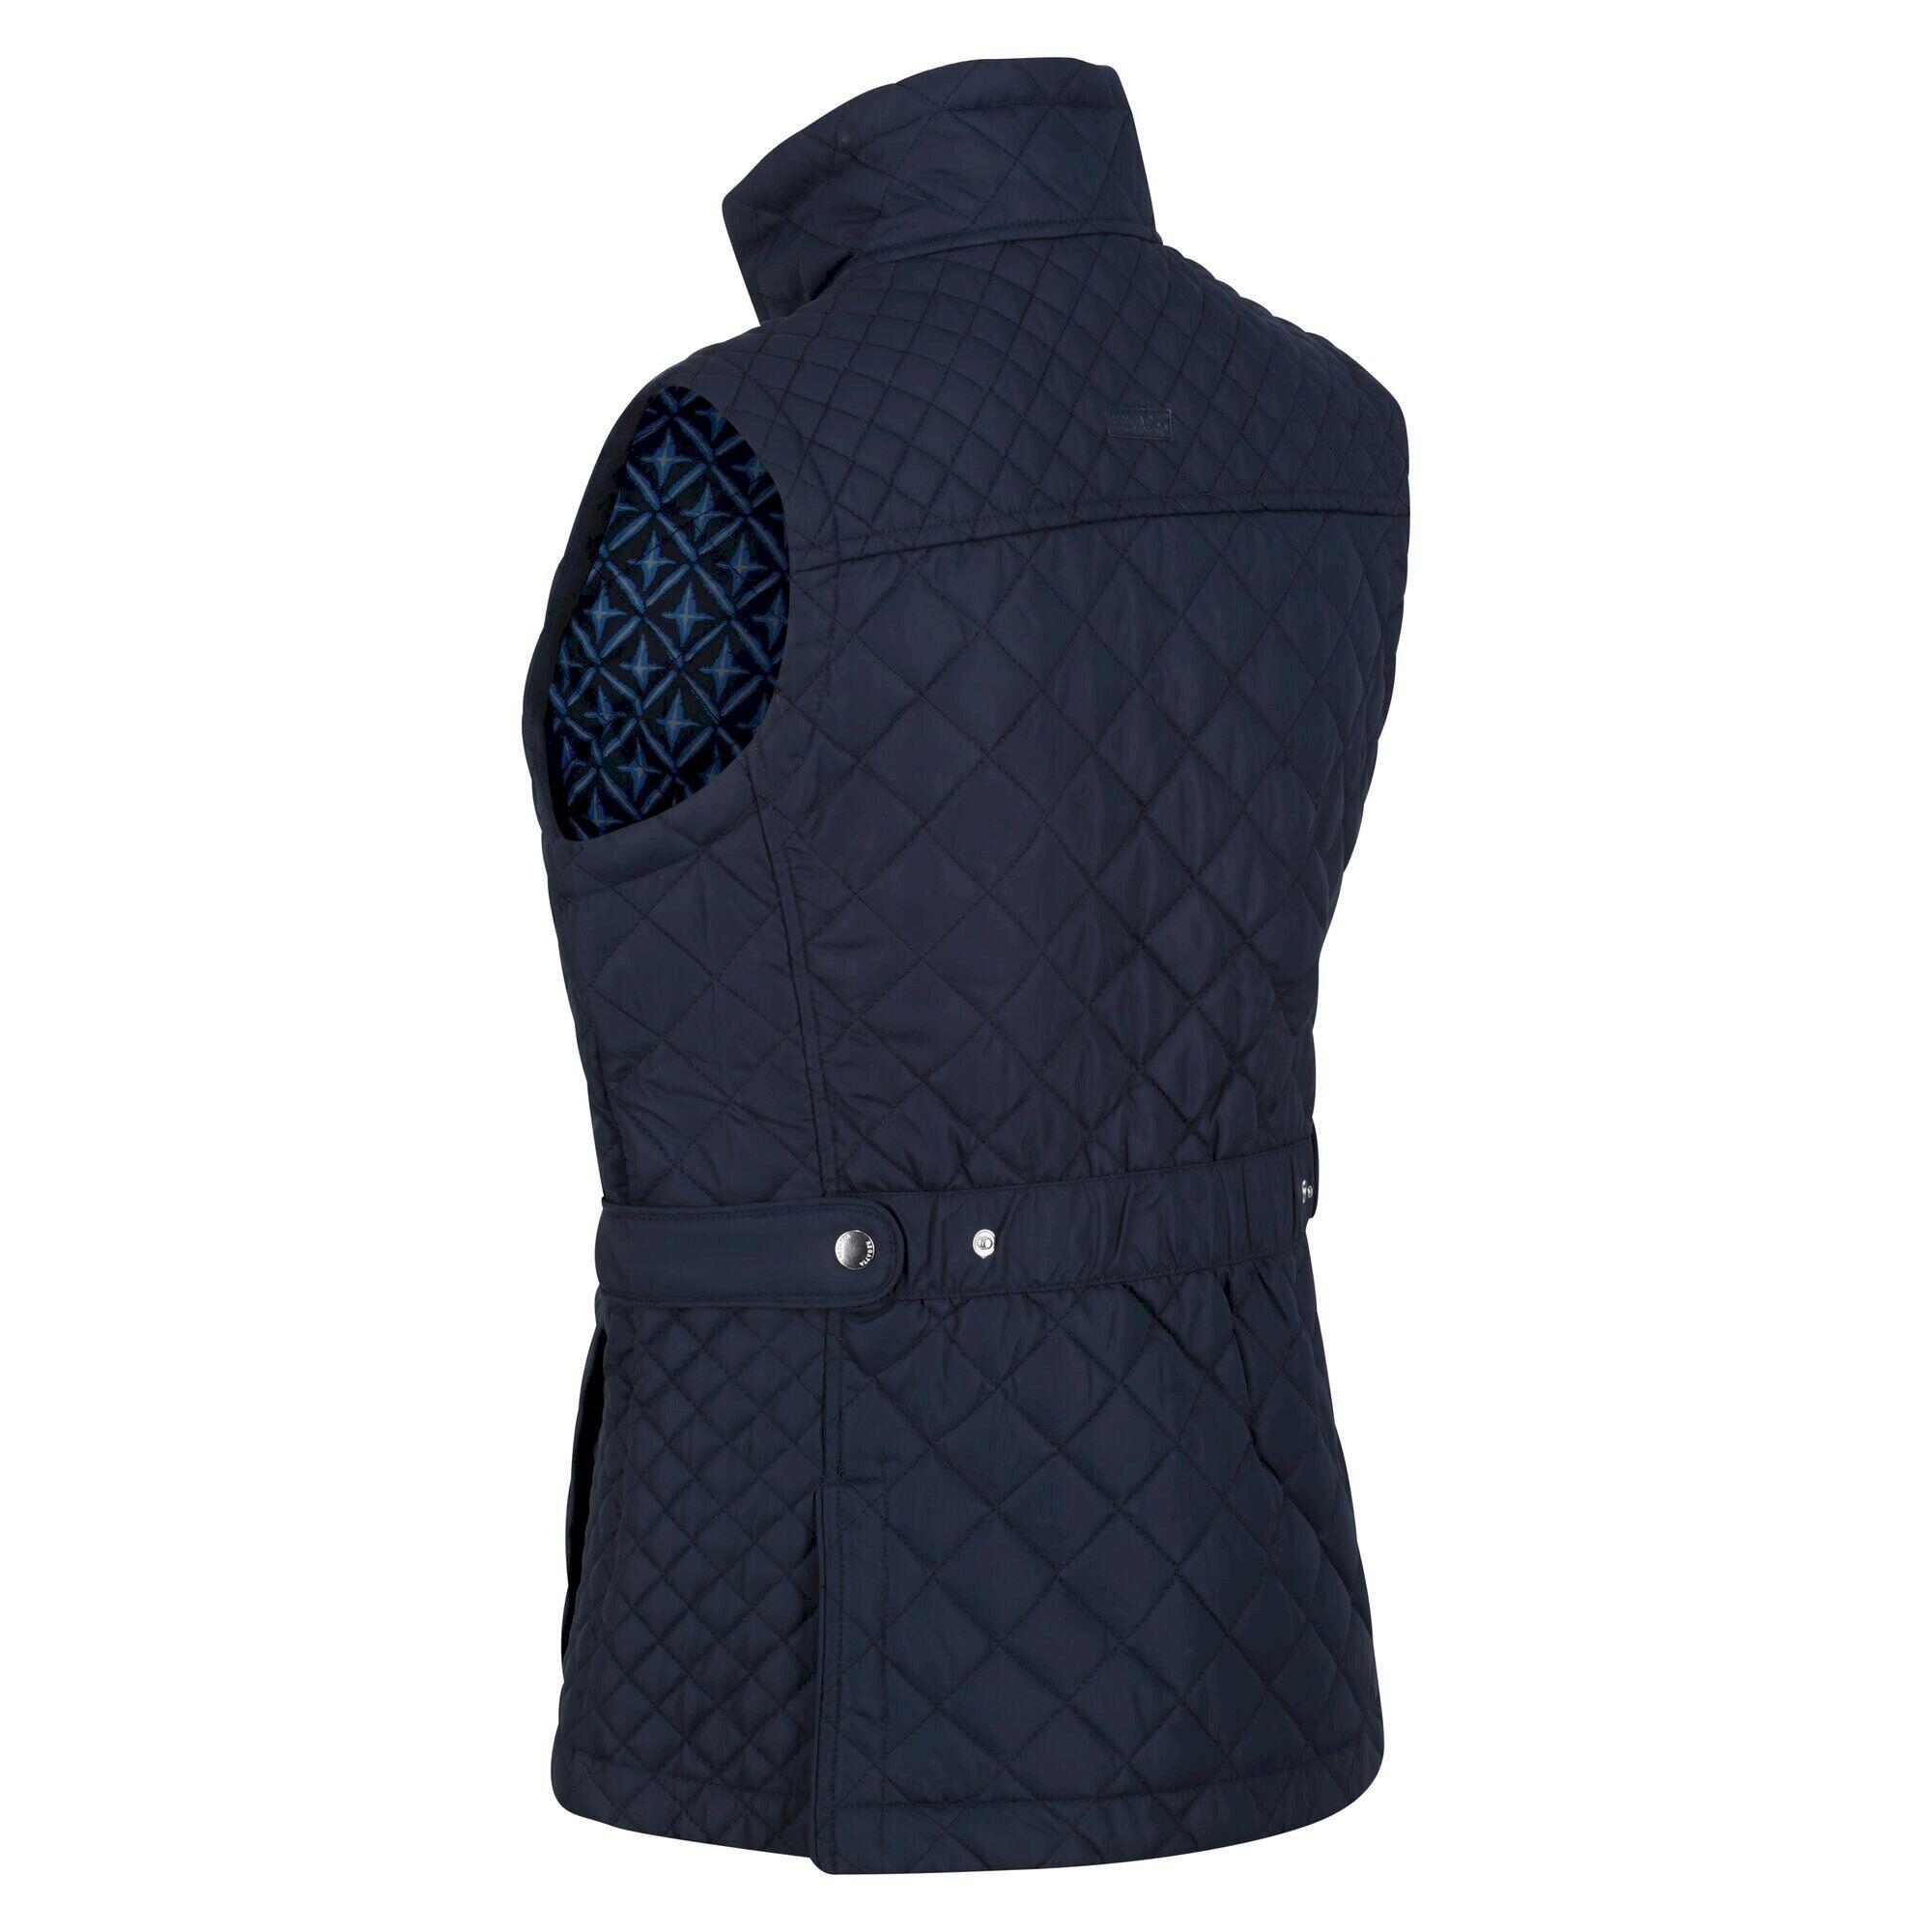 Womens/Ladies Charleigh Quilted Body Warmer (Navy Tile) 3/5